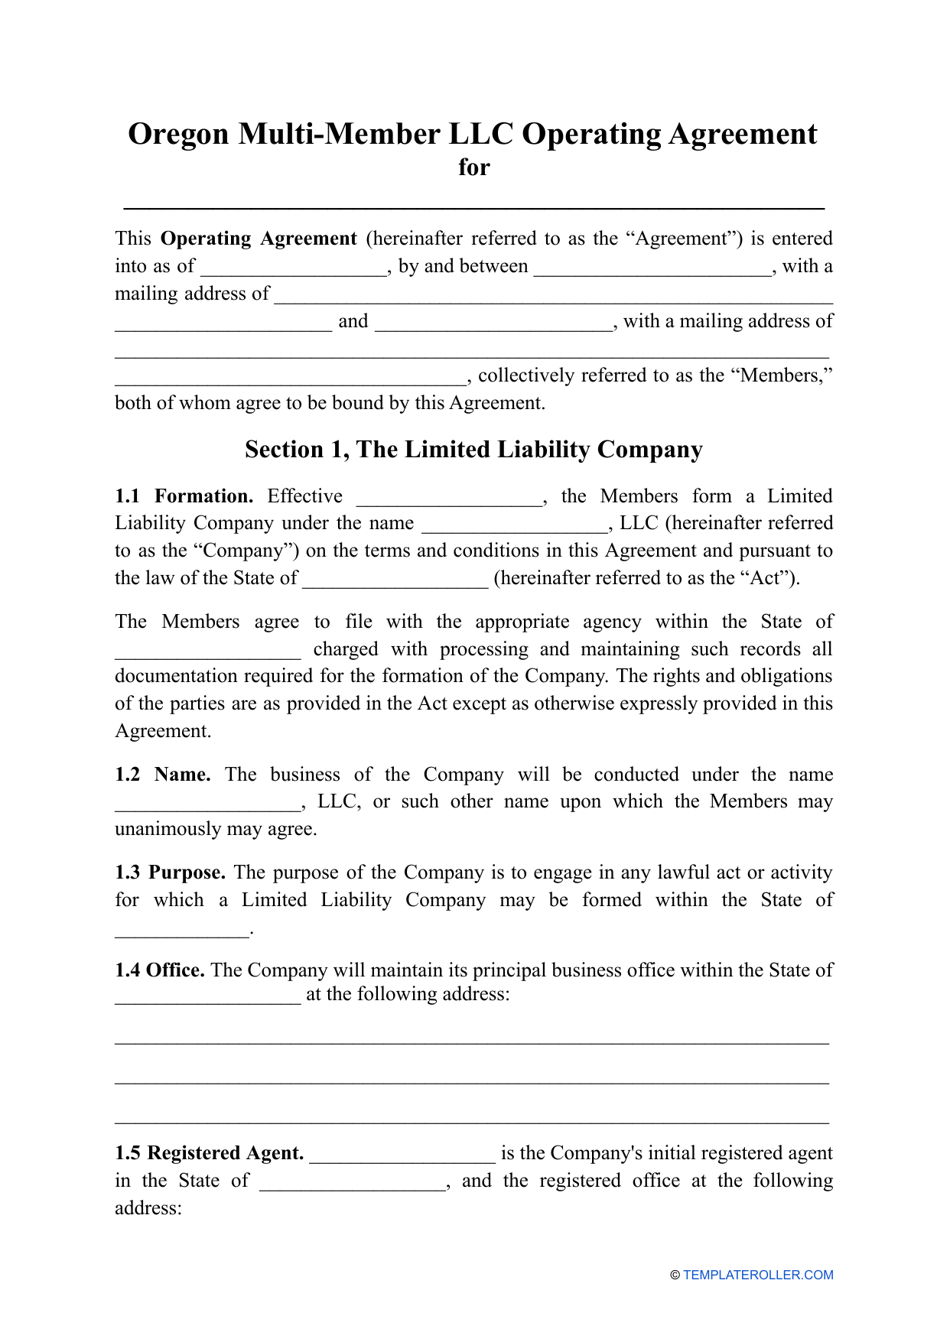 Multi-Member LLC Operating Agreement Template - Oregon, Page 1